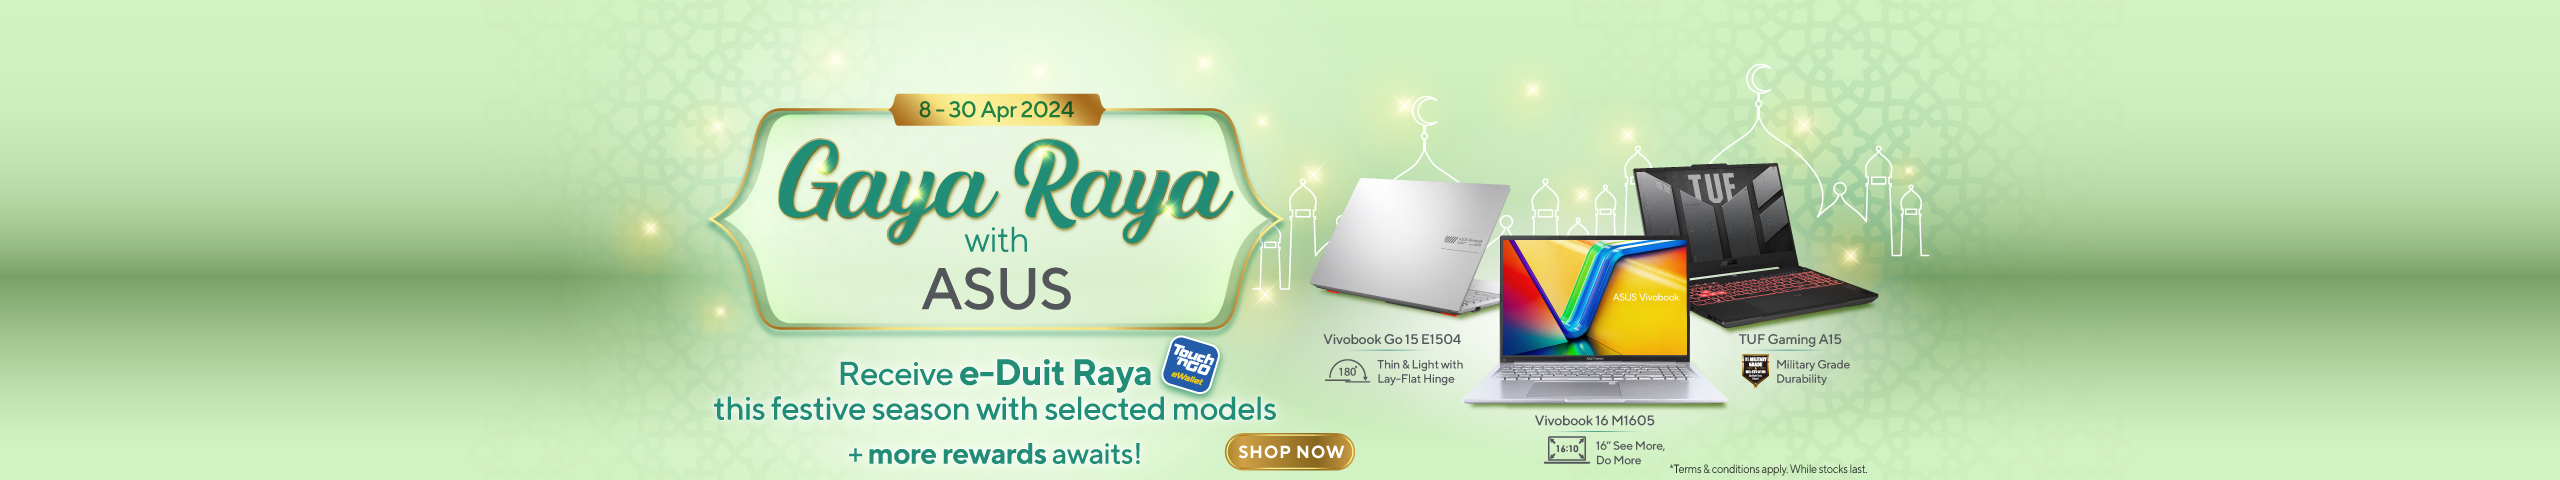 raya sale promotion 2024, free tng ewallet credit with selected laptop models purchase